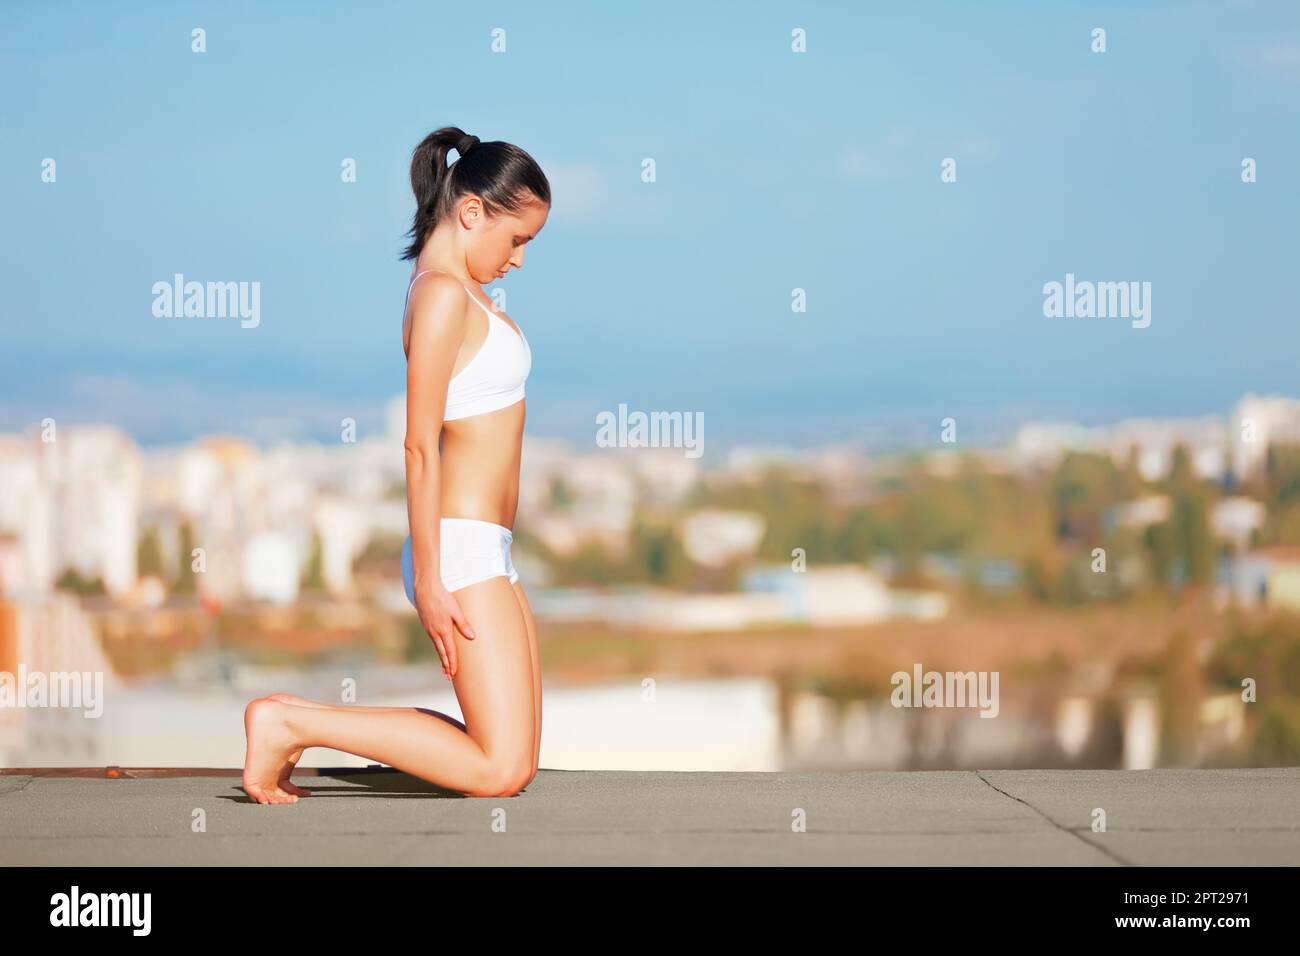 Finding her center with solitutde. an attractive young woman in workout gear doing yoga on a rooftop Stock Photo